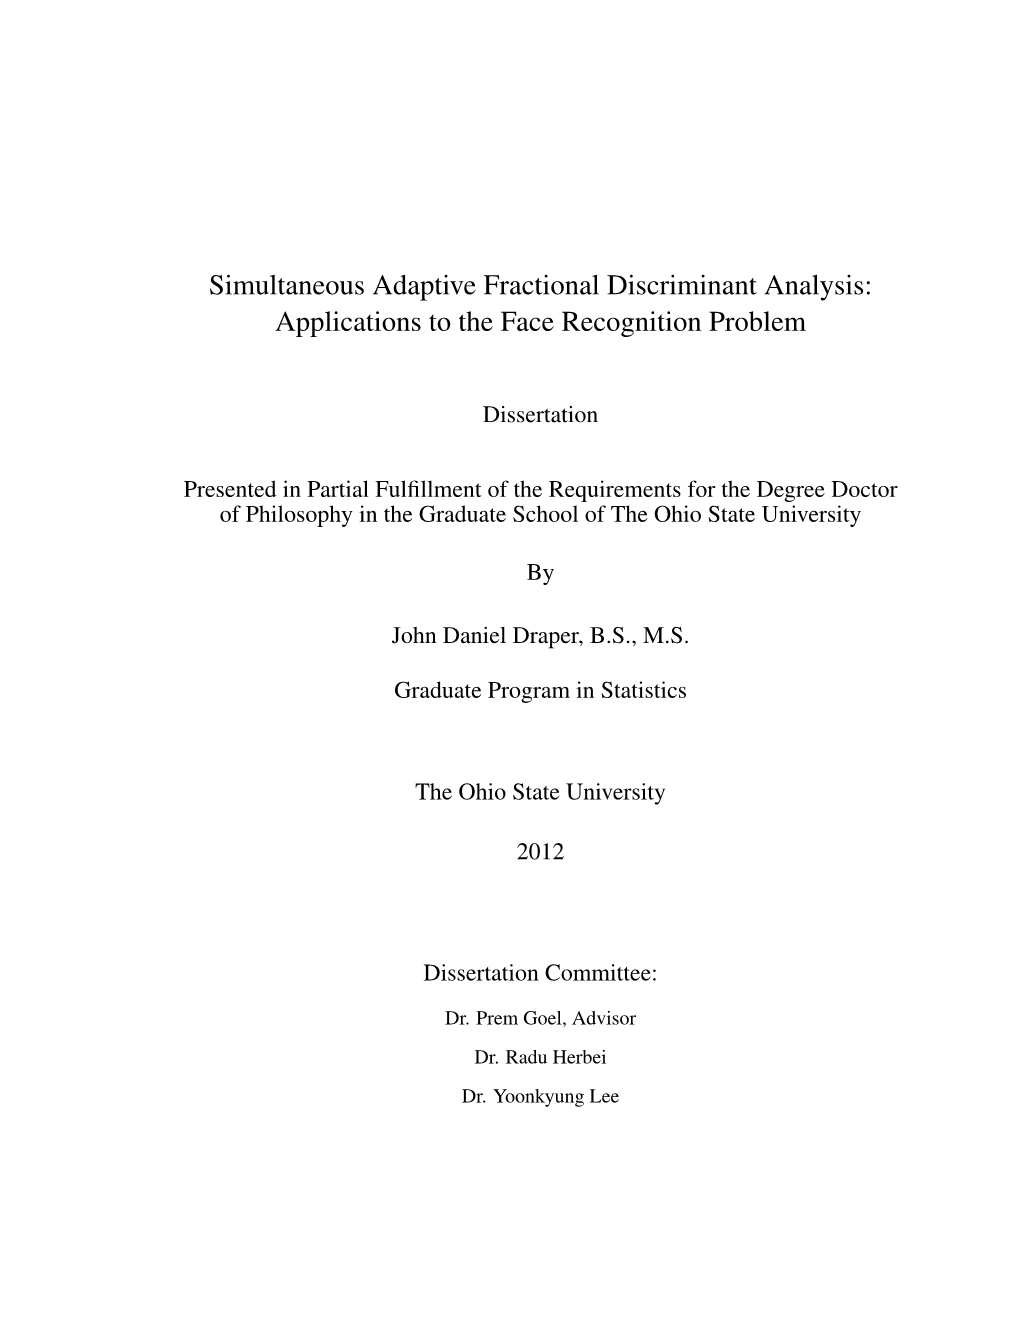 Simultaneous Adaptive Fractional Discriminant Analysis: Applications to the Face Recognition Problem